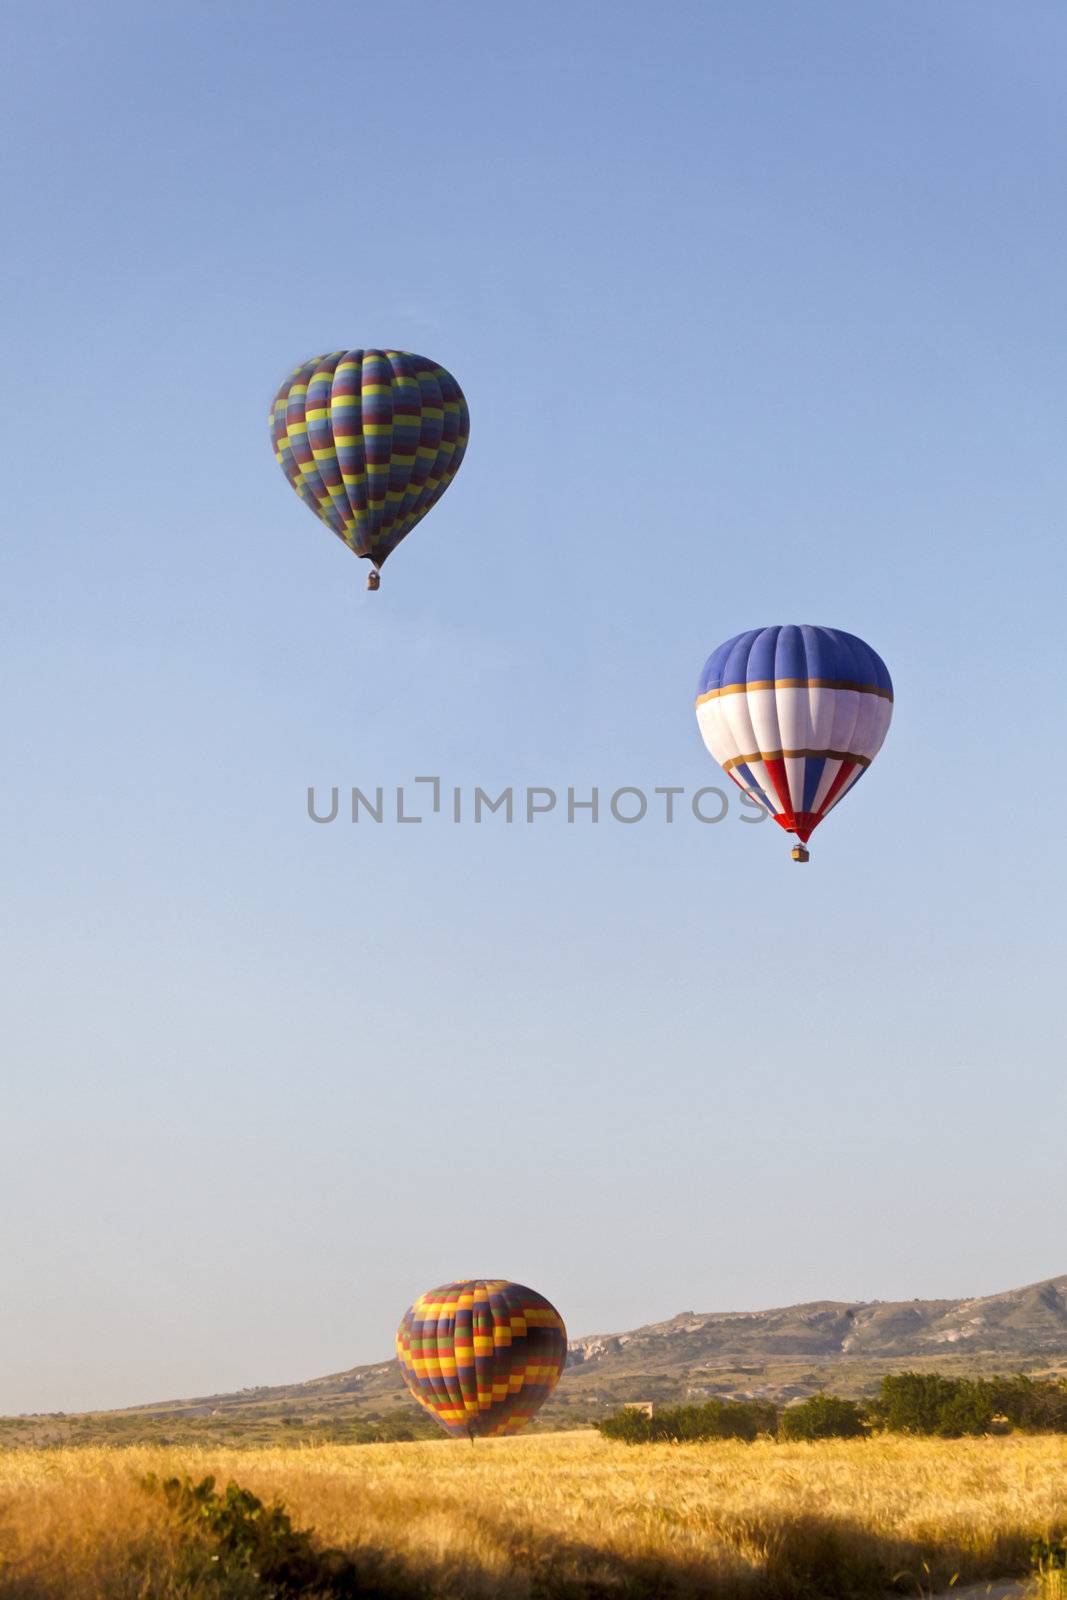 Colourful hot air balloons rising over the ridge. A generic portrait was taken early morning in Cappadocia, Turkey.